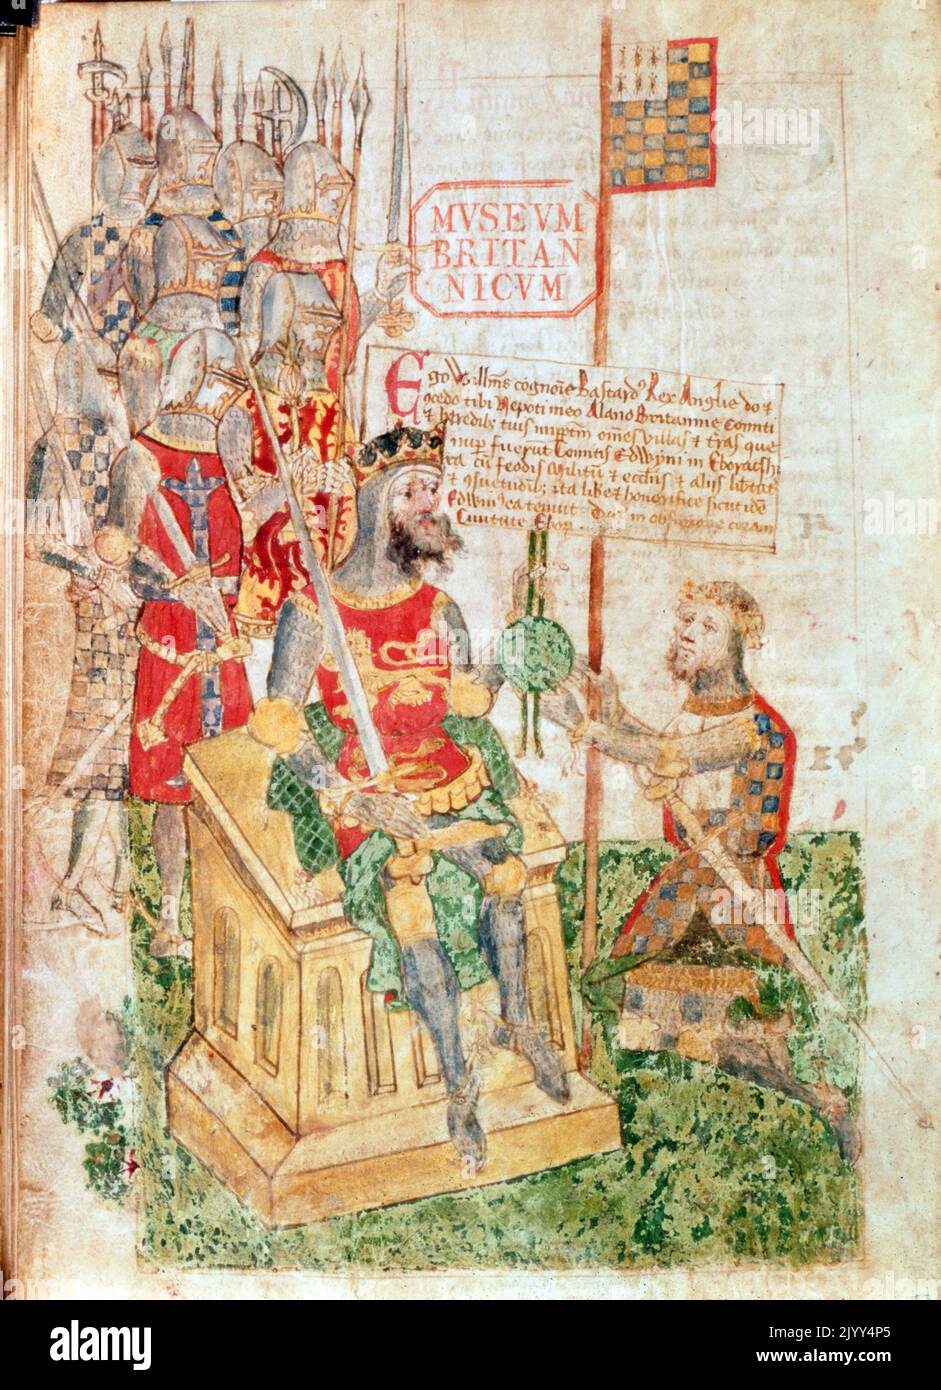 William The Conqueror, Granting Richmond shire To Alan Rufus, Count Of Brittany, In The Register Of The Honour Of Richmond. Illustrated manuscript using Ink and pigments on vellum. Dated 1480. At the Battle of Hastings in 1066 William the Conqueror was aided by Alan Rufus, Count of Brittany, and subsequently rewarded him with extensive estates in the north of England, which were formed into the honour of Richmond. Stock Photo